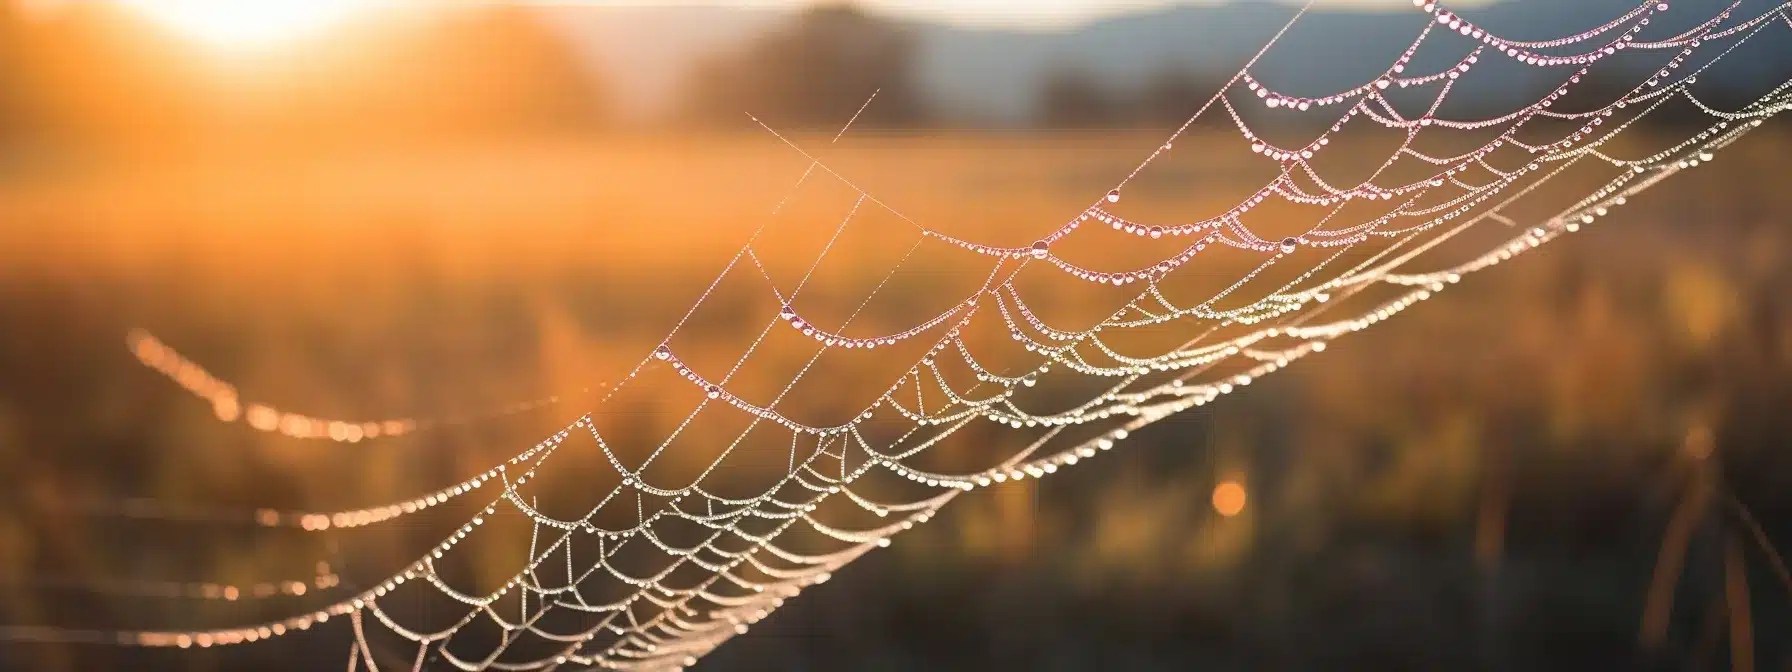 A Spider'S Web Glistening In The Dew Of Dawn, Attracting And Ensnaring The Attention Of Potential Customers.